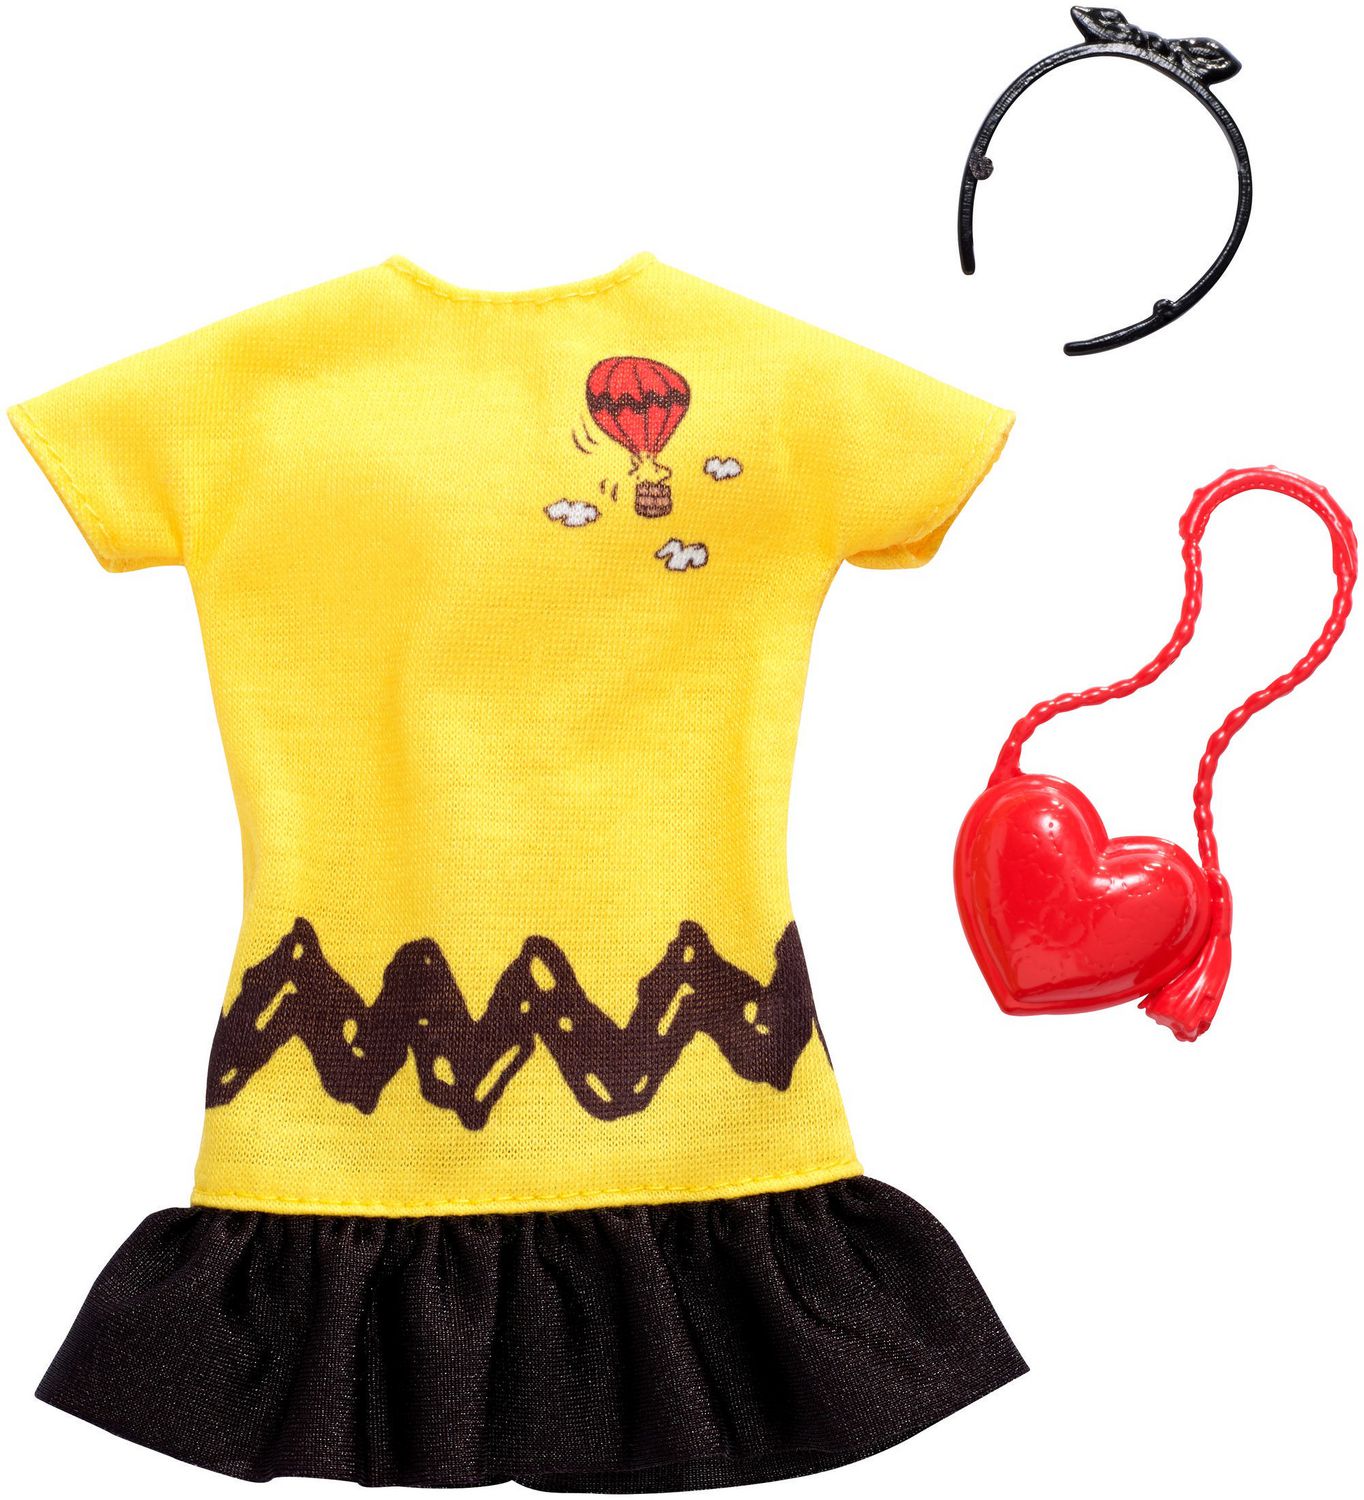 Barbie Clothes Peanuts Charlie Brown Dress For Barbie Doll With Heart 